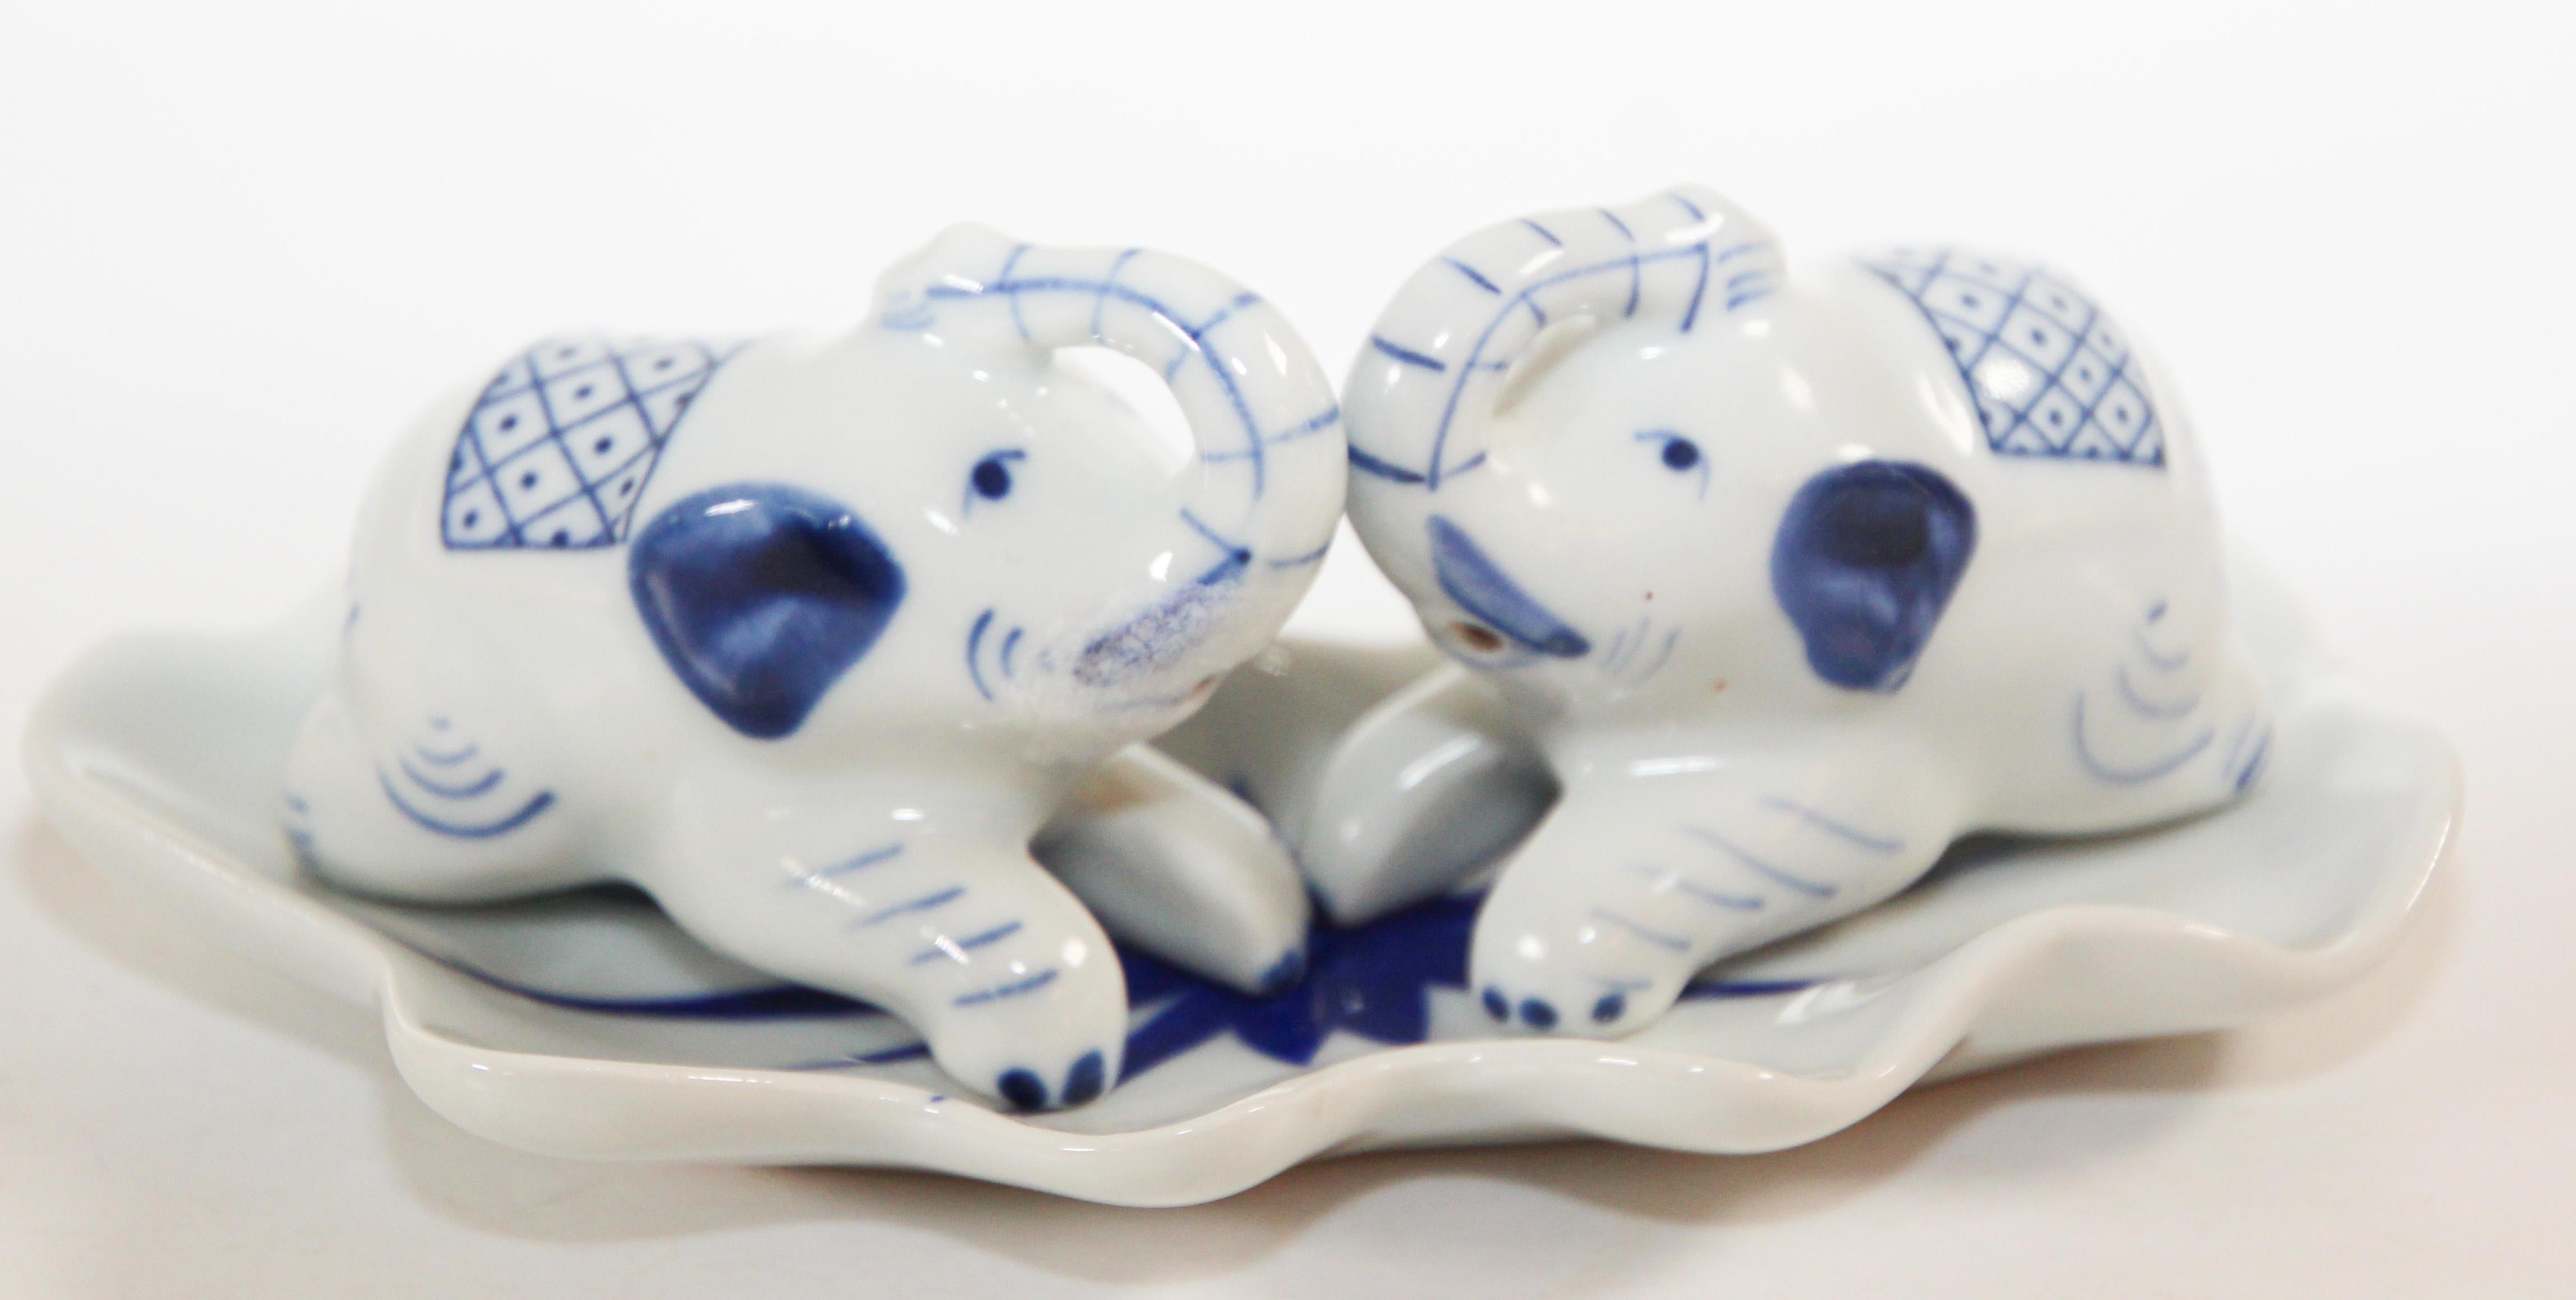 Vintage collectible blue and white porcelain elephants salt and pepper Shakers with tray.
Shakers are 2”H x 2 1/5”. 
Tray is 3” x 5”. 
Chinoiserie hand painted porcelain of elephants, trunk up for good luck.